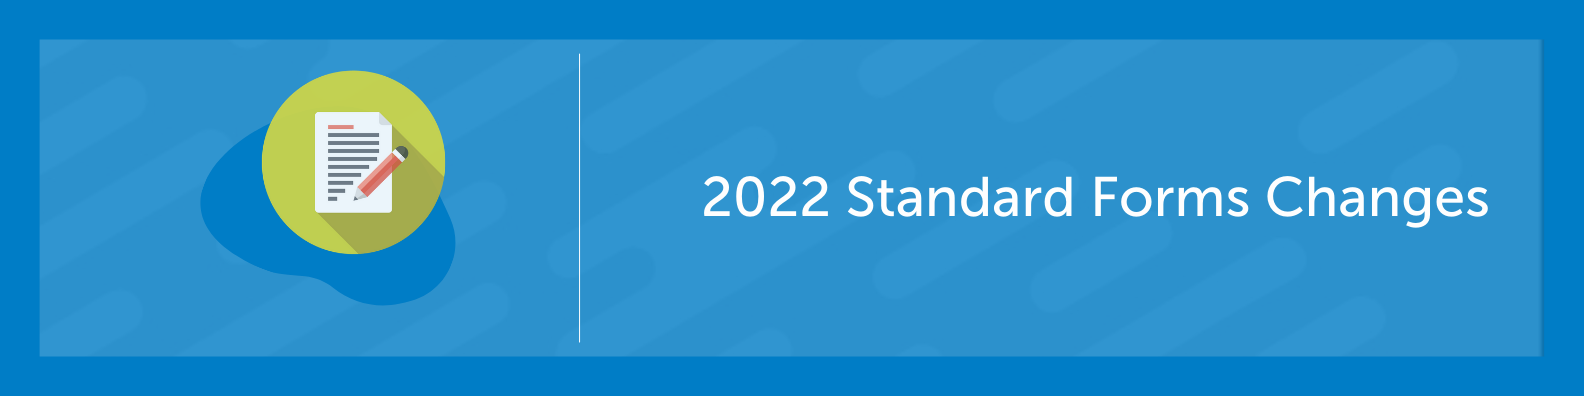 2022 Standard Forms Changes